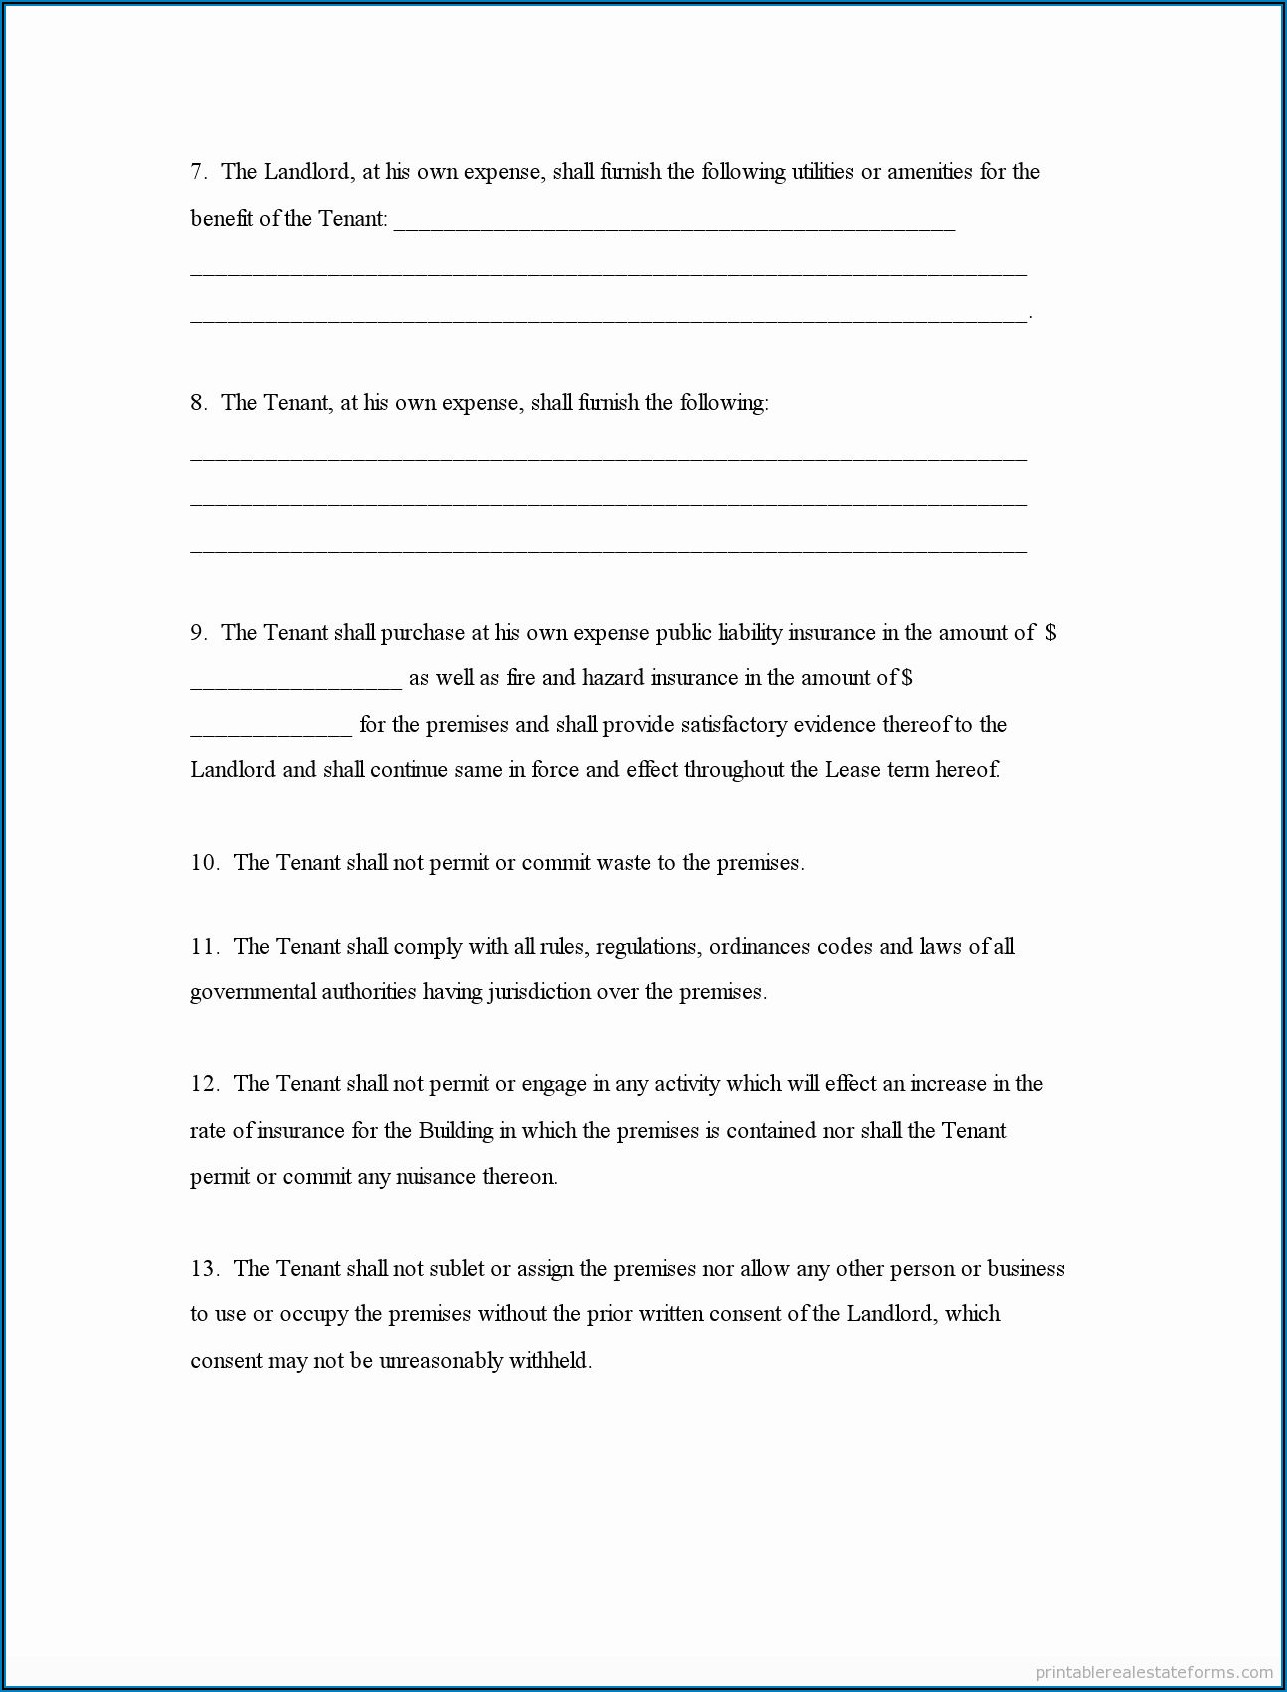 Free Commercial Real Estate Lease Agreement Form